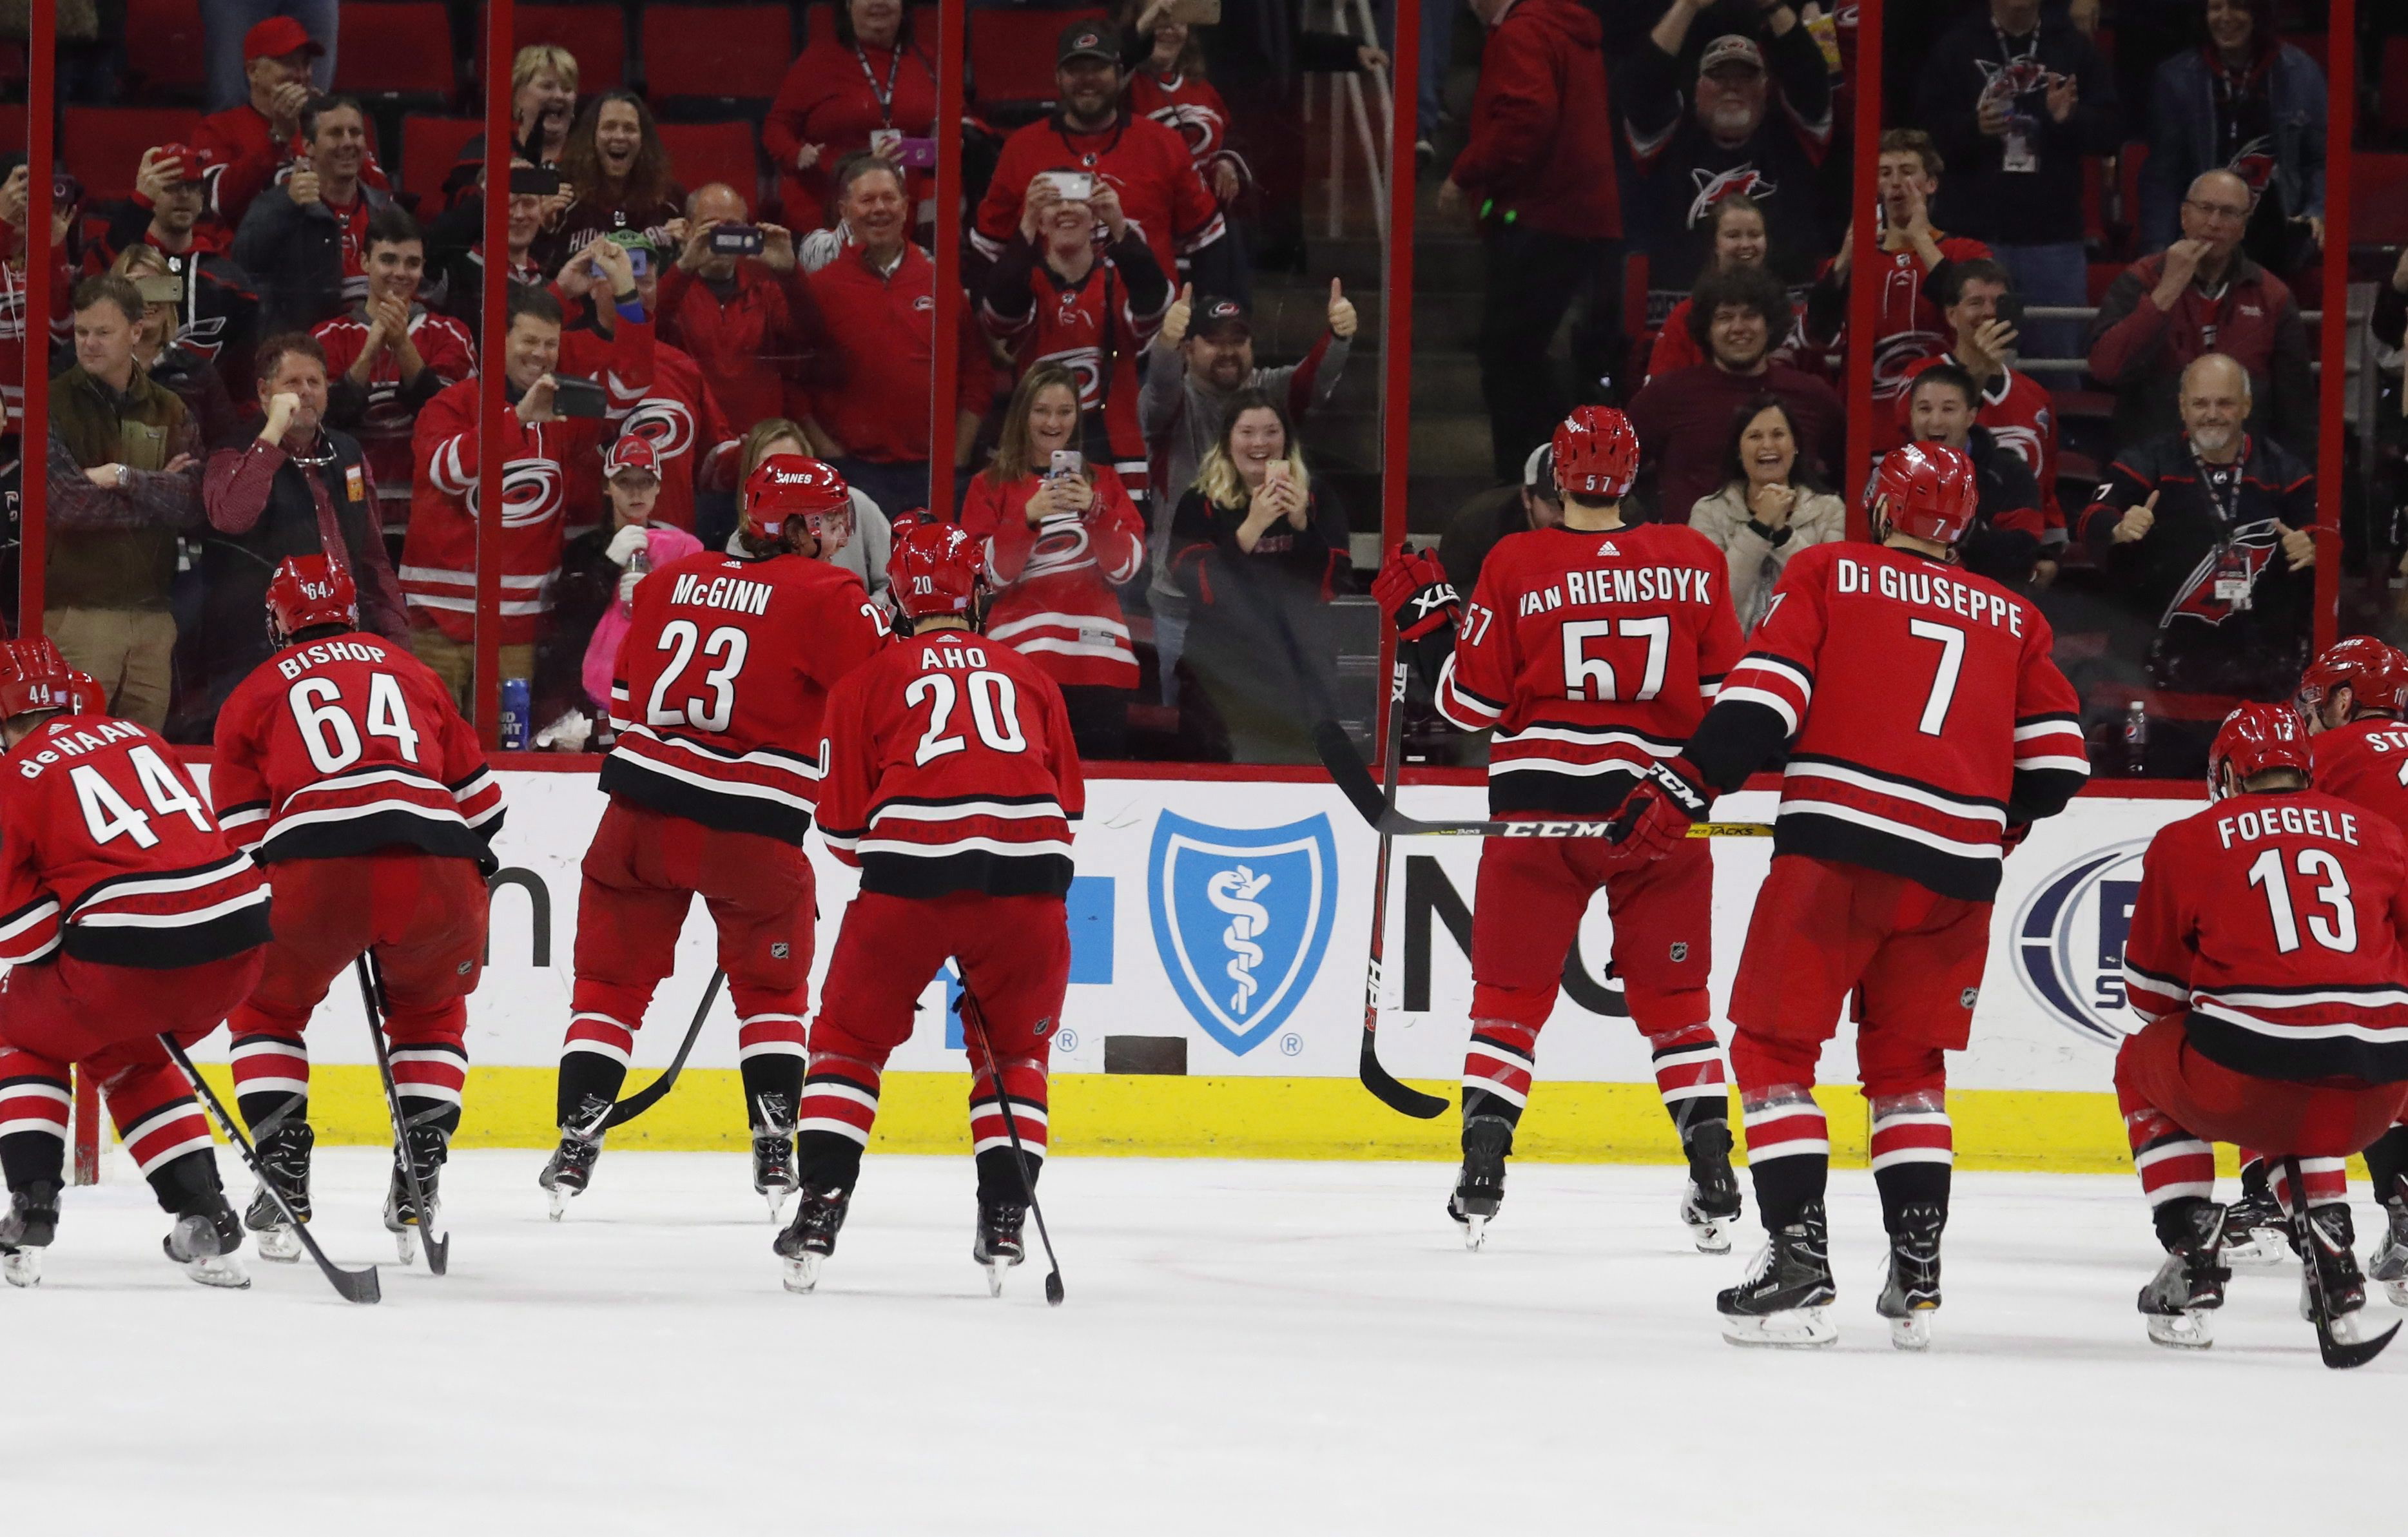 Carolina Hurricanes hit it out of the park in more ways than one on Friday